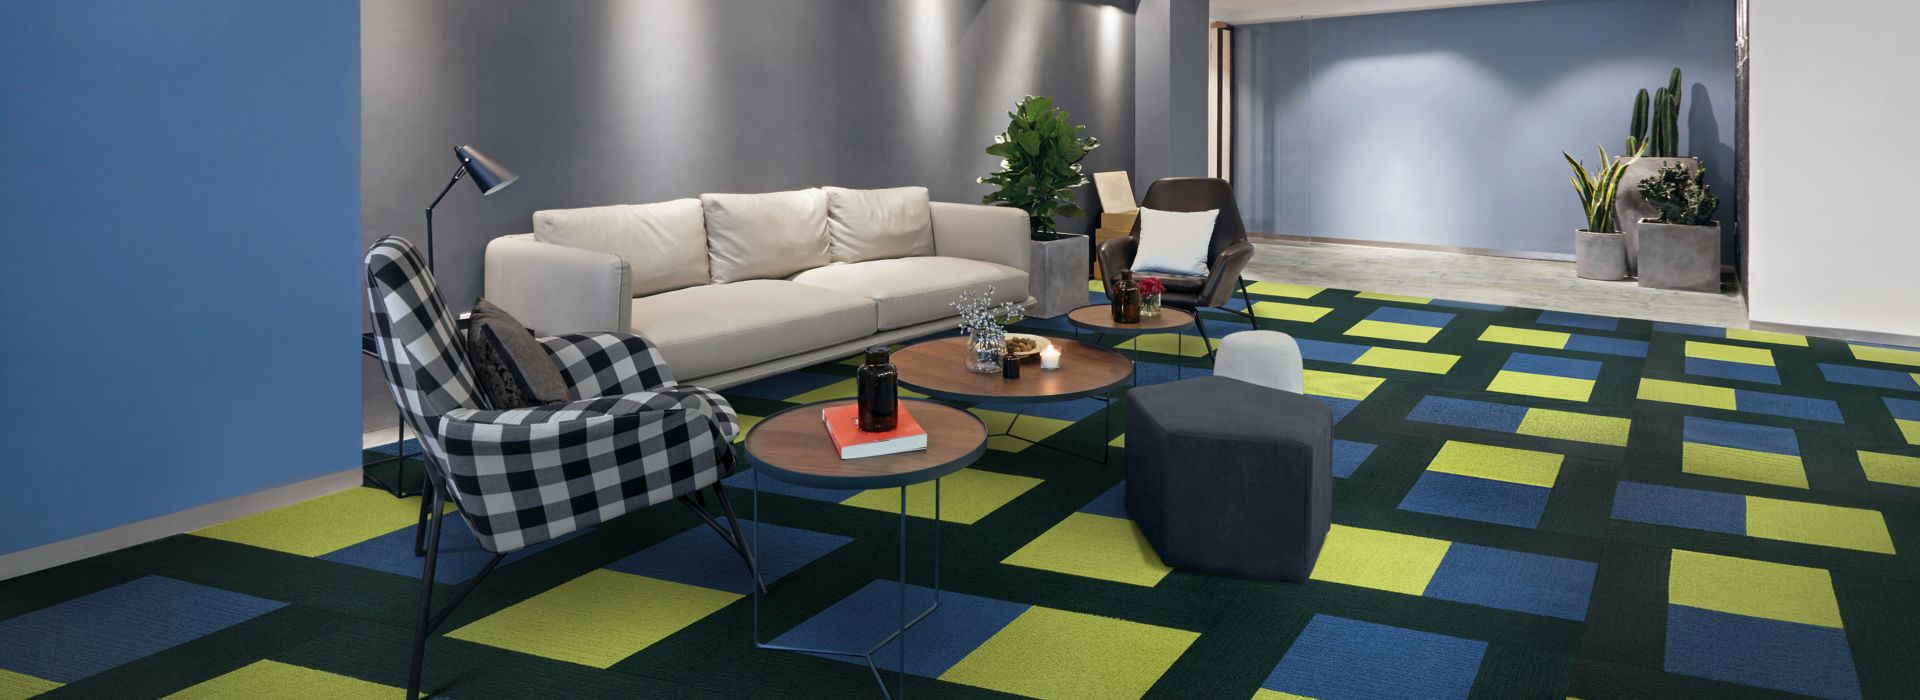 Interface Viva Colores carpet tile and Textured Stones LVT in seating area with couch 